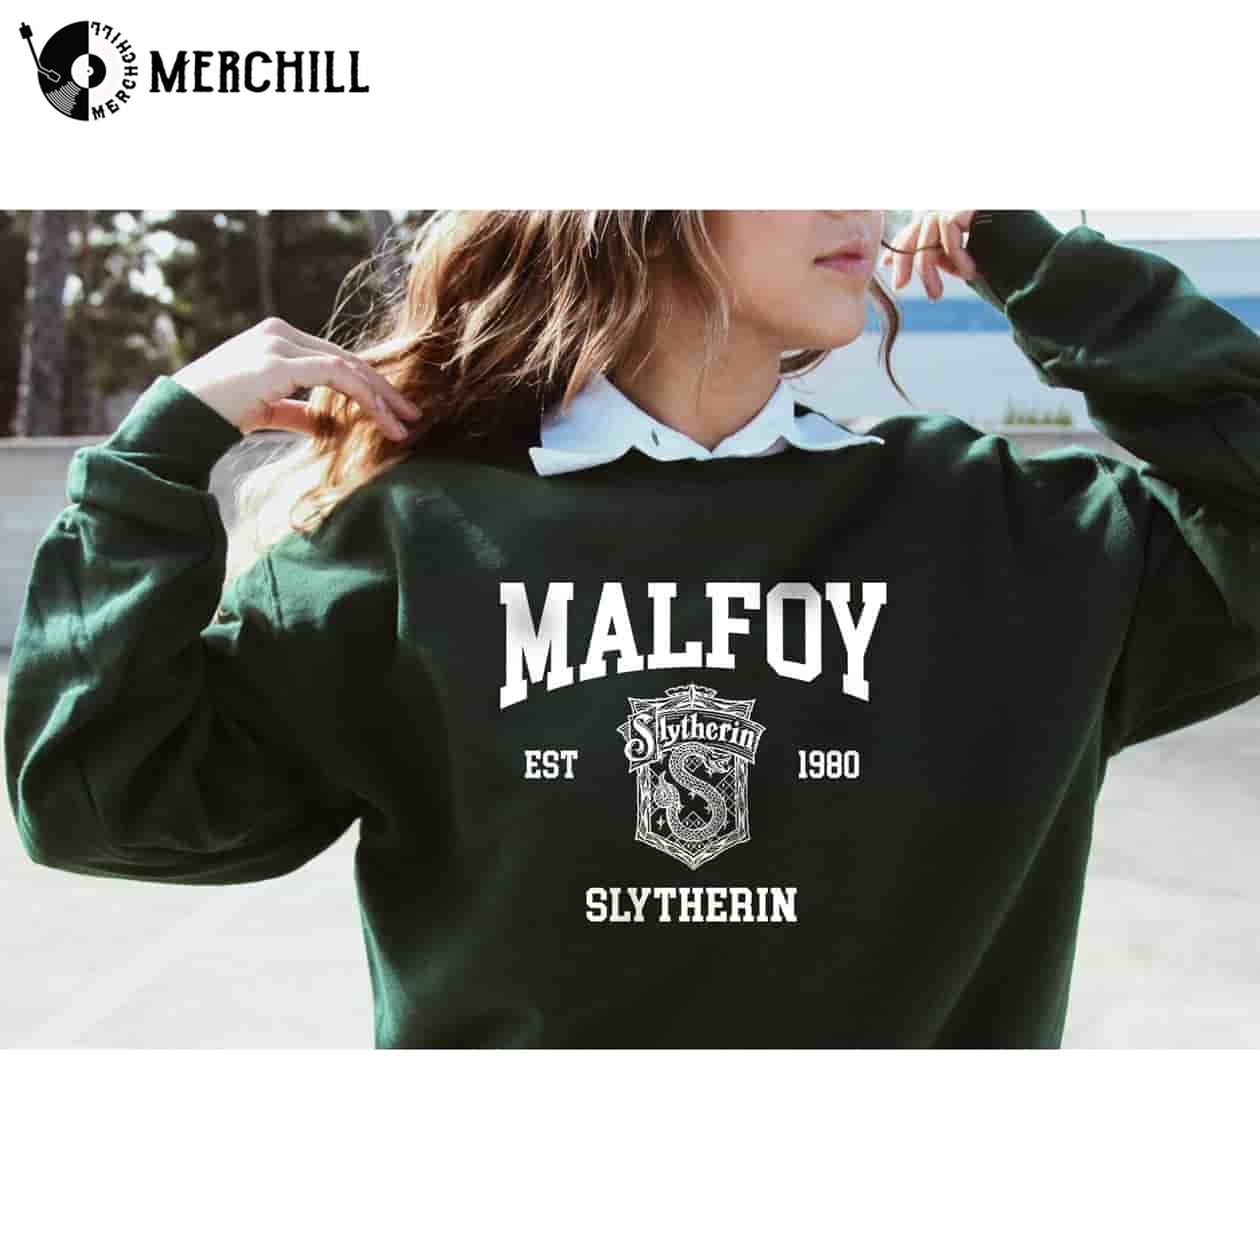 Draco Malfoy Sweatshirt Harry Potter Slytherin Shirt Slytherin Gifts -  Happy Place for Music Lovers